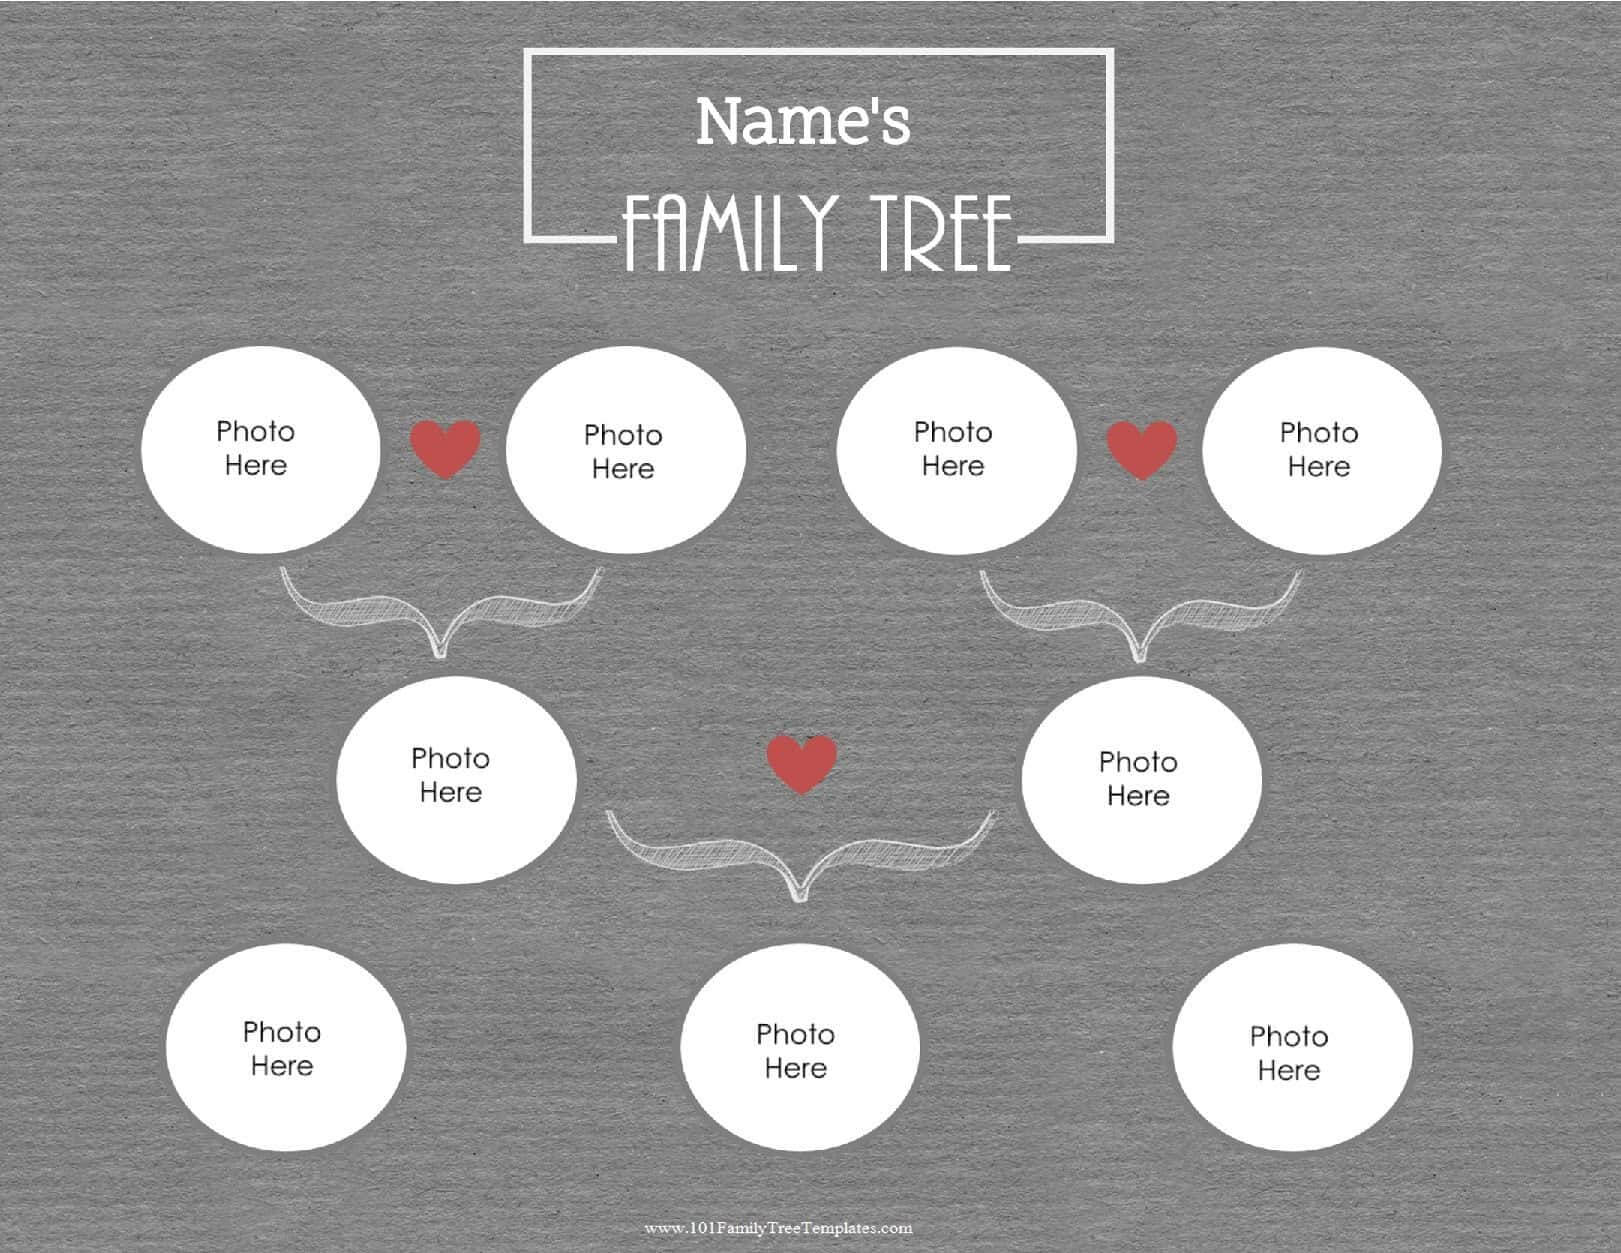 Free Editable Family Tree Maker Templates | Customize Online Inside 3 Generation Family Tree Template Word